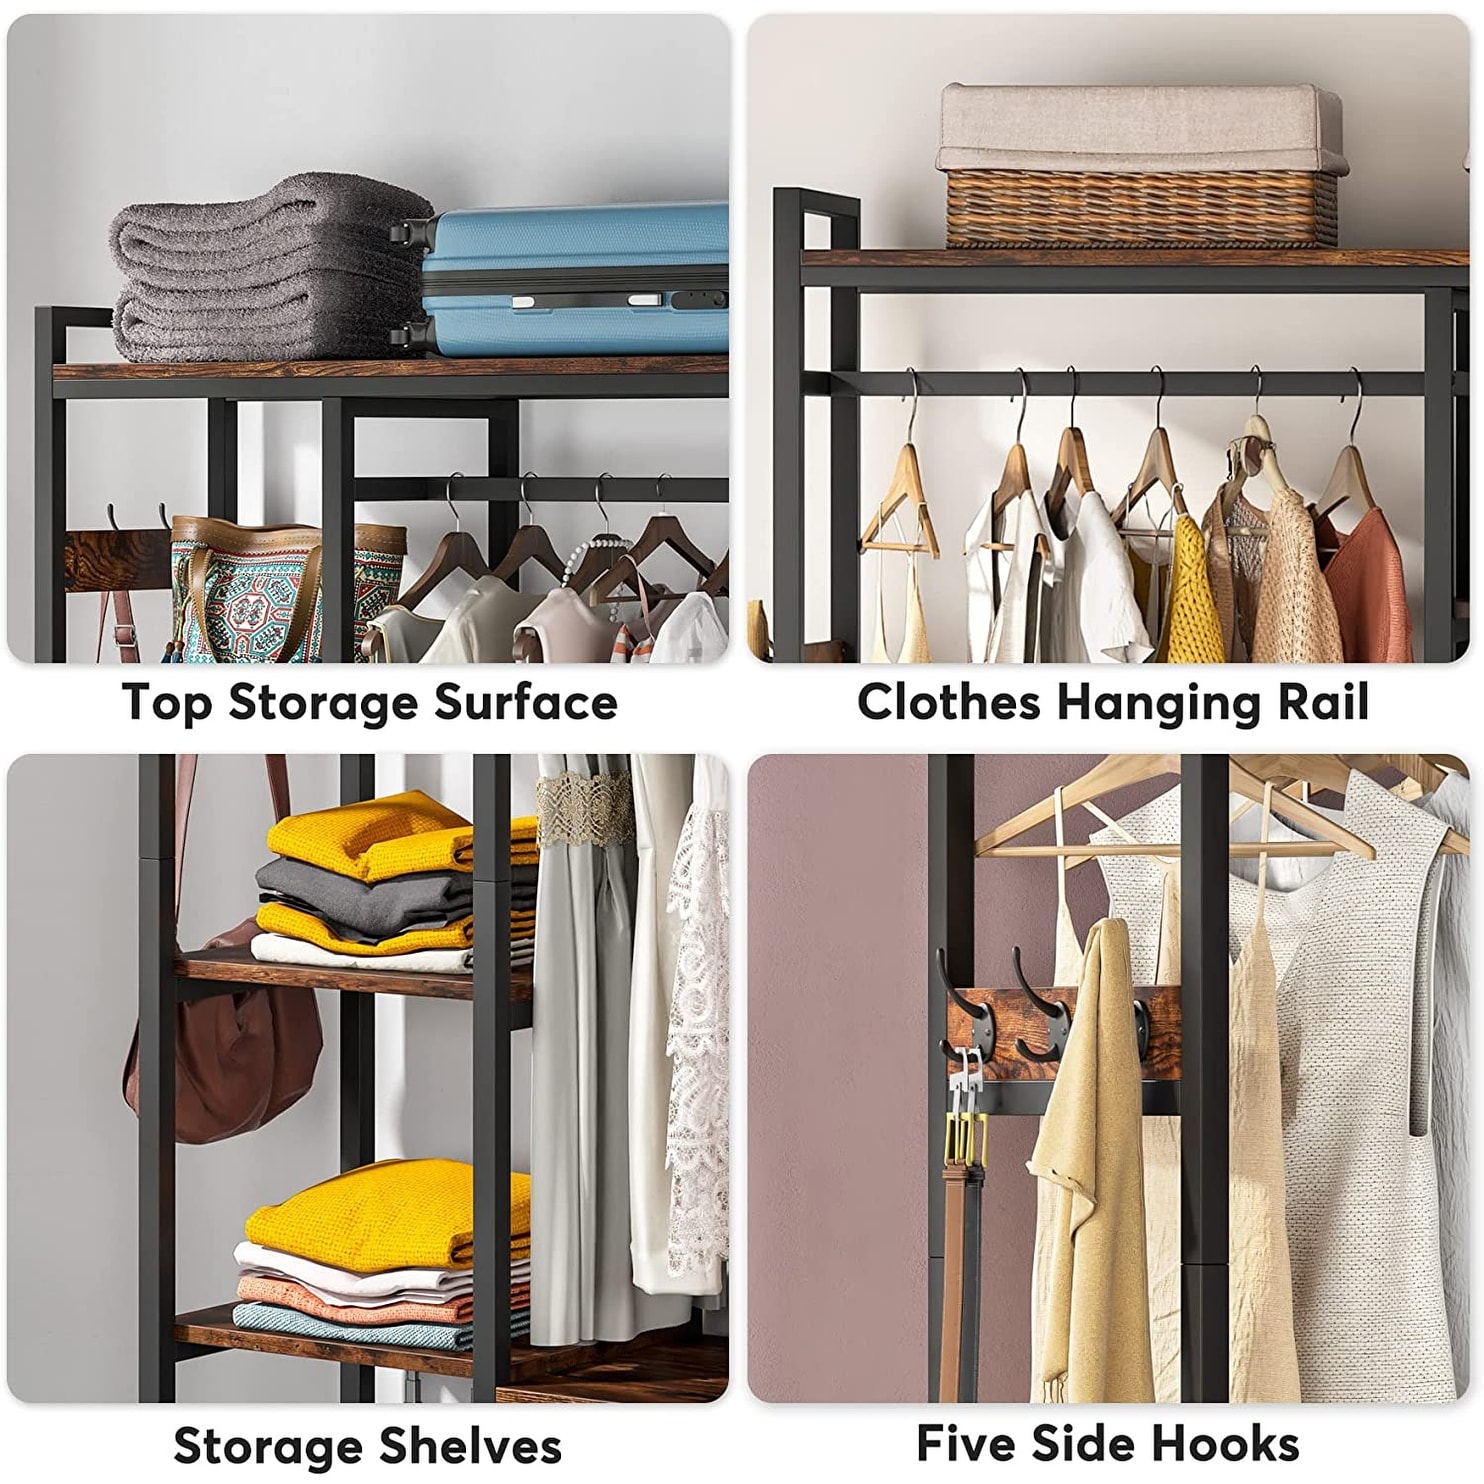 Metal Wood Free-standing Closet Clothing Rack Closet Organizer System with  Shelves Clothes Garment Rack Shelving for Bedroom - On Sale - Bed Bath &  Beyond - 35142876